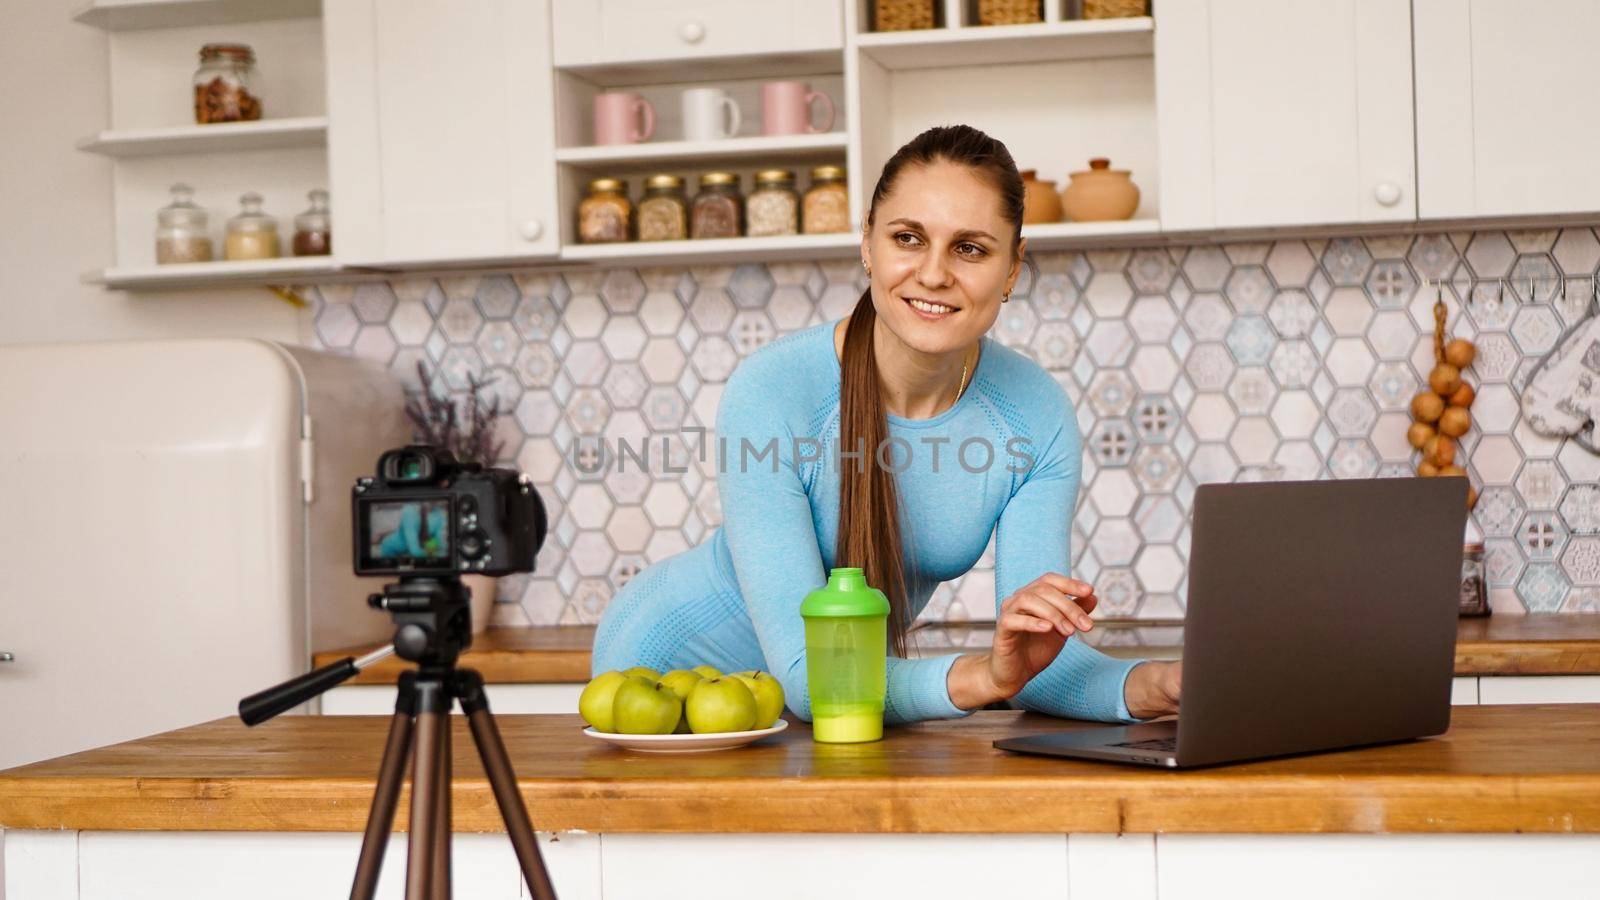 Young woman in kitchen with laptop smiling. Food blogger concept. A woman is recording a video about healthy eating. Camera on a tripod.